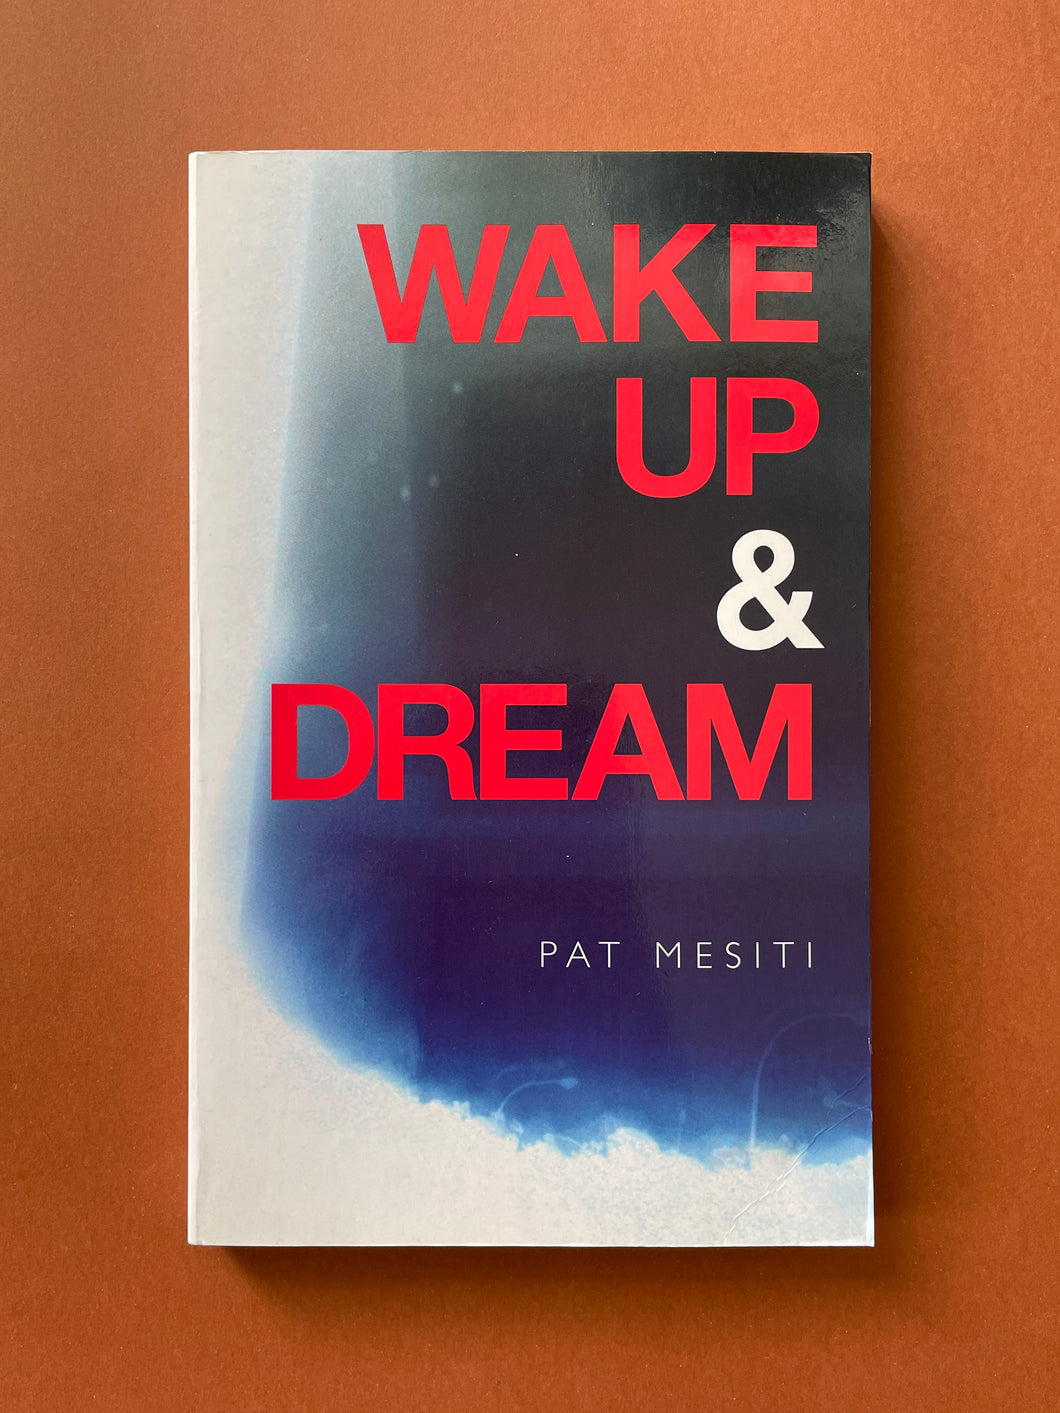 Wake up and Dream by Pat Mesiti: photo of the front cover which shows minor creasing on the bottom-right corner.